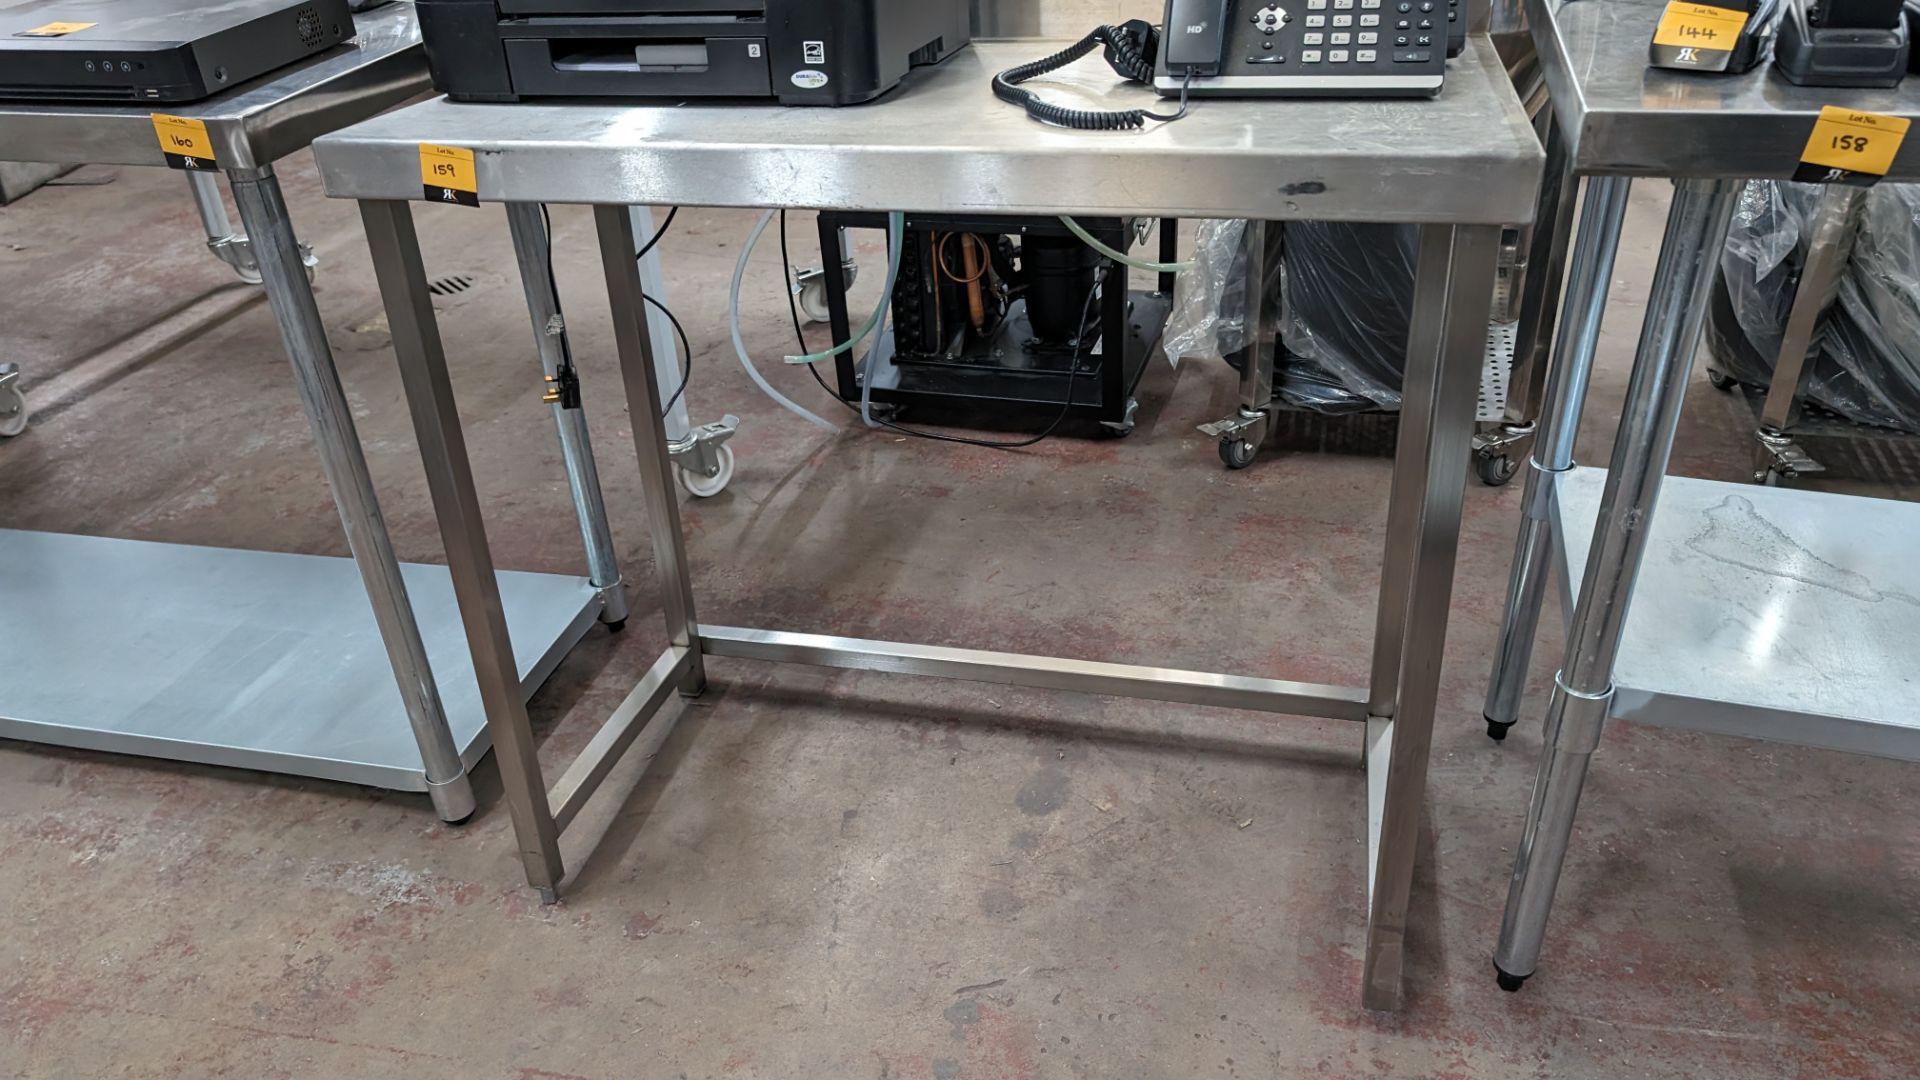 Stainless steel table with upstand at rear, max dimensions: 870mm x 535mm x 970mm - Image 2 of 3